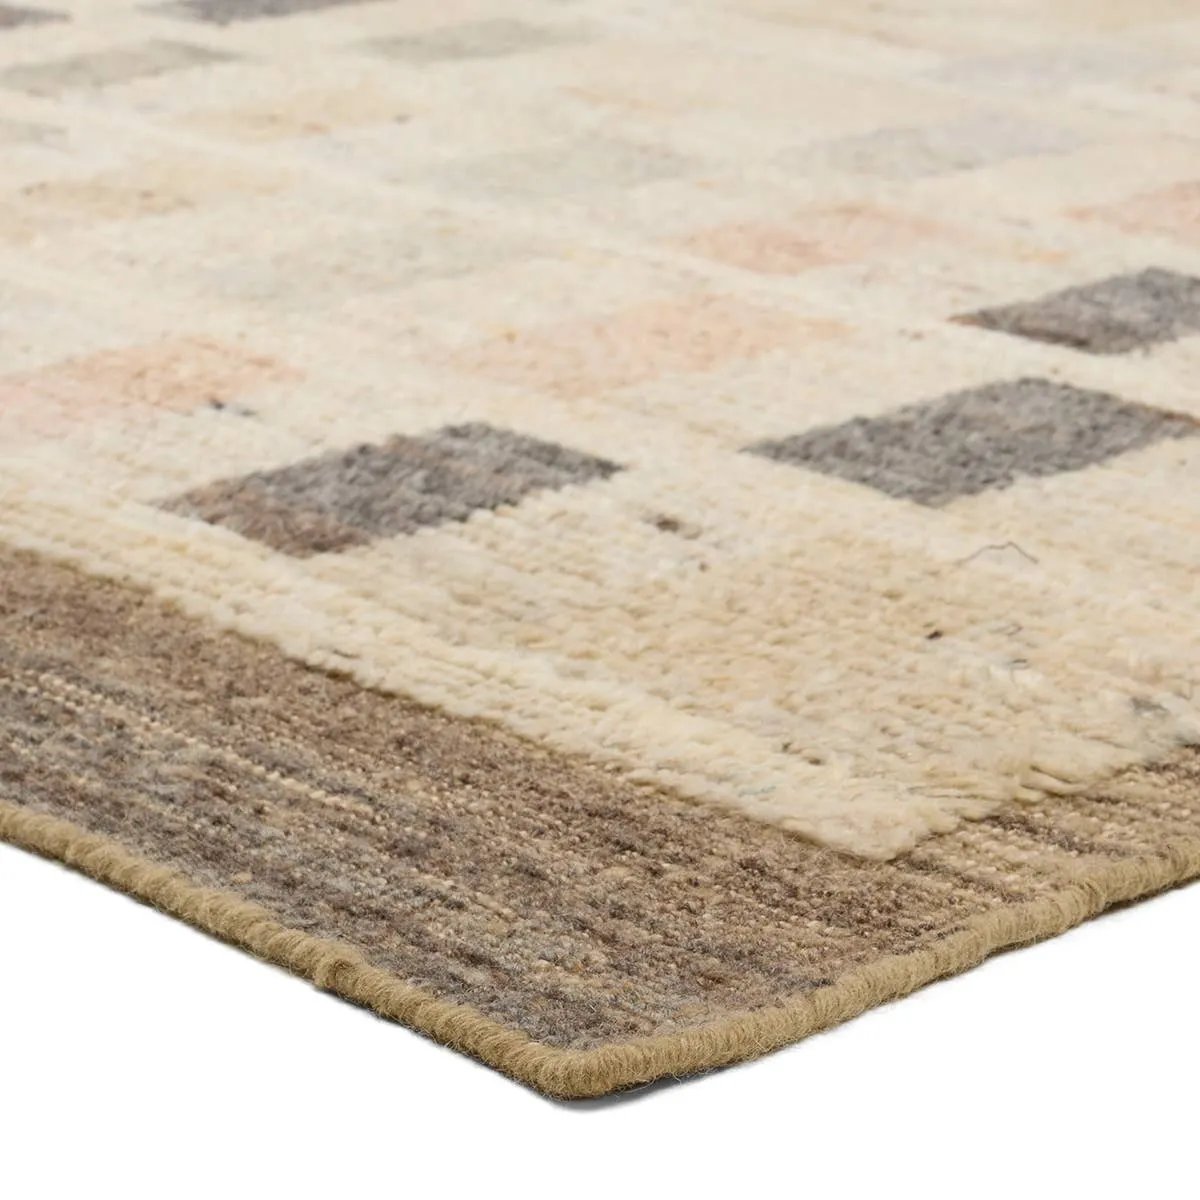 With its understated adventurous ethos, the Kazben is a lifestyle rug that hints luxury. An homage to the collective decades of quality rug making, its unsurpassed quality is an investment for today and tomorrow. The Ituri design speaks to the artistry of finely made rugs. Amethyst Home provides interior design, new home construction design consulting, vintage area rugs, and lighting in the Kansas City metro area.